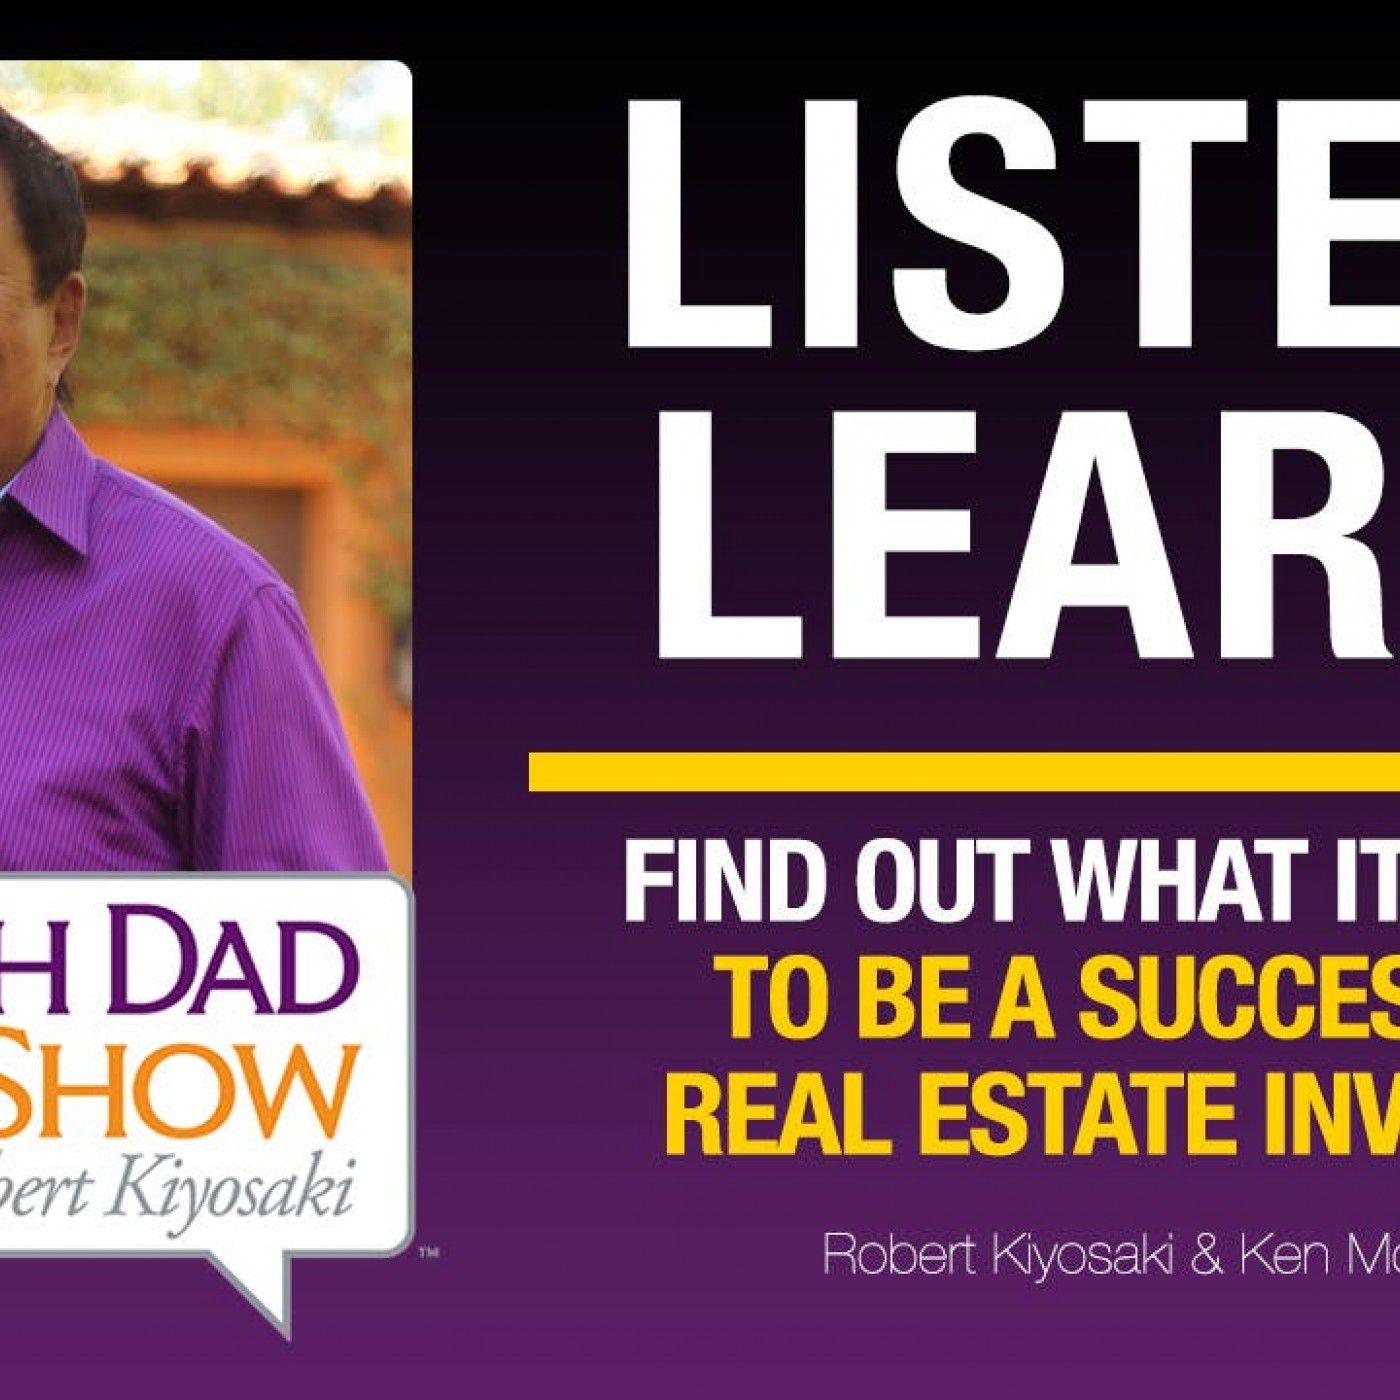 FIND OUT WHAT IT TAKES TO BE A SUCCESSFUL REAL ESTATE INVESTOR – Robert Kiyosaki, Ken McElroy